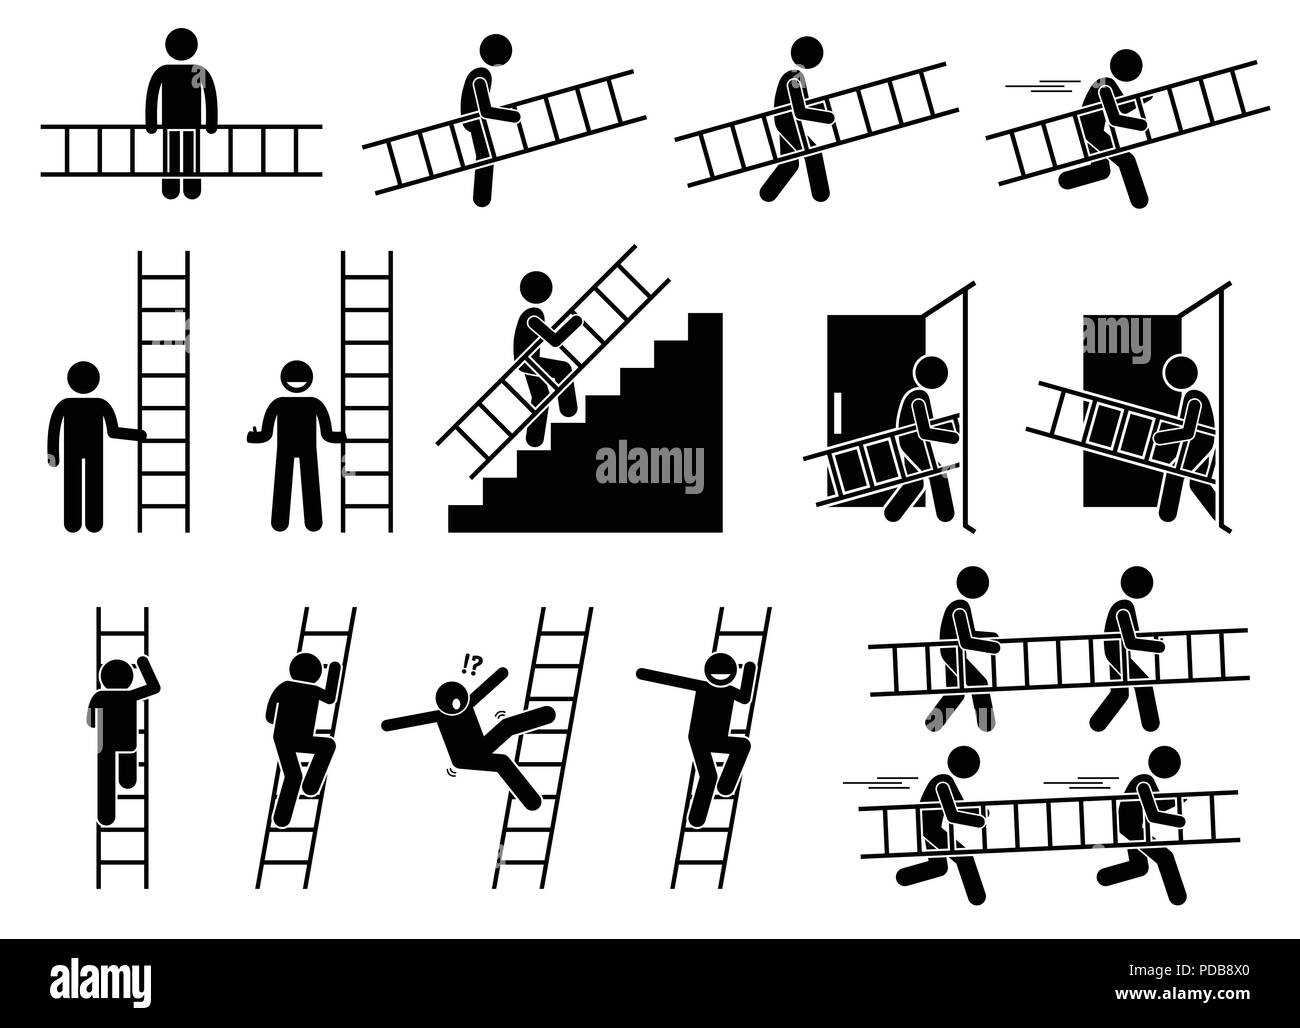 Man with a ladder. Pictogram showing a man holding and carrying a ladder while walking and running. Stock Vector